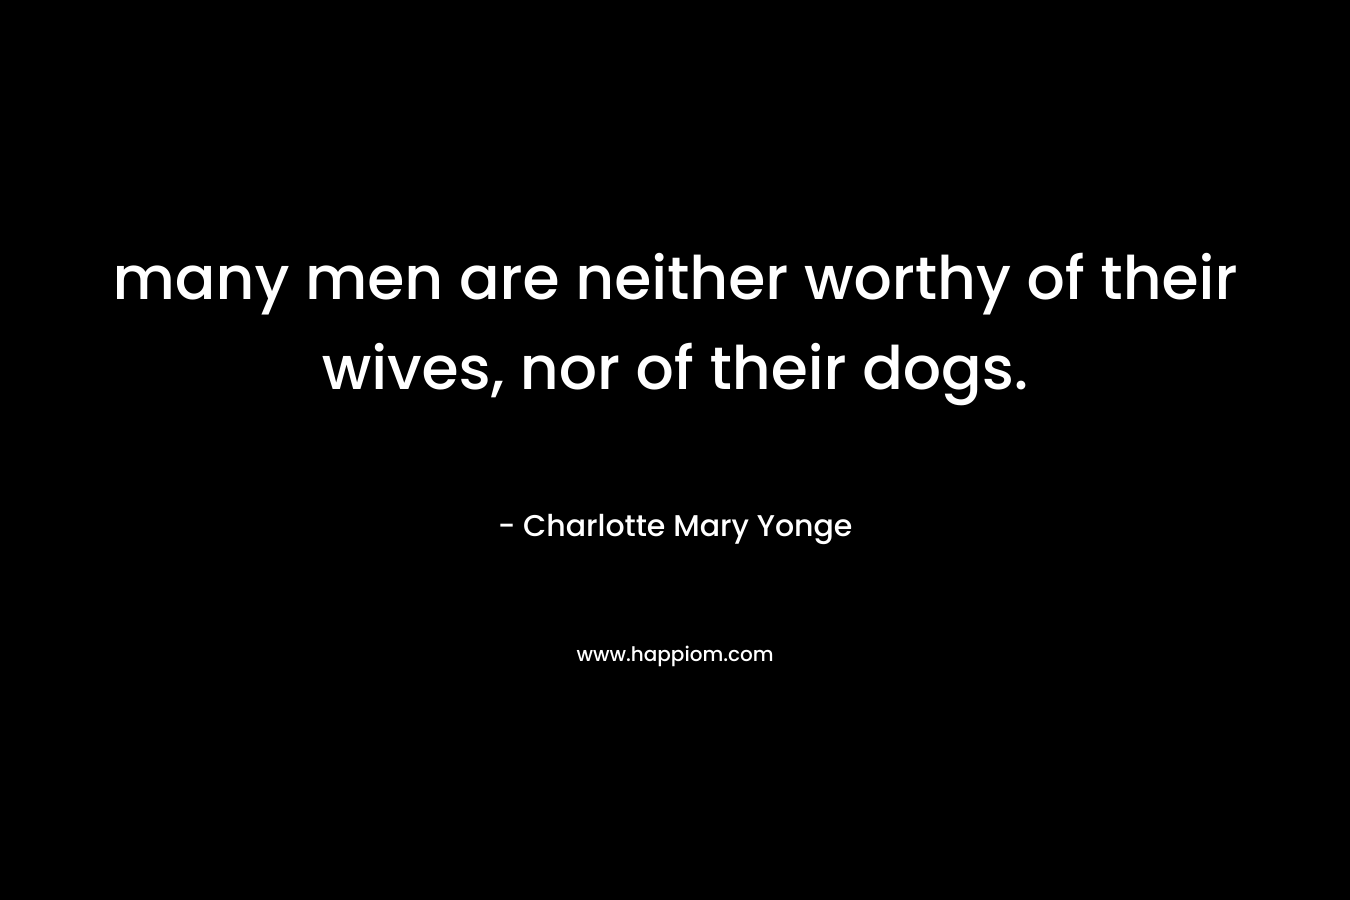 many men are neither worthy of their wives, nor of their dogs.